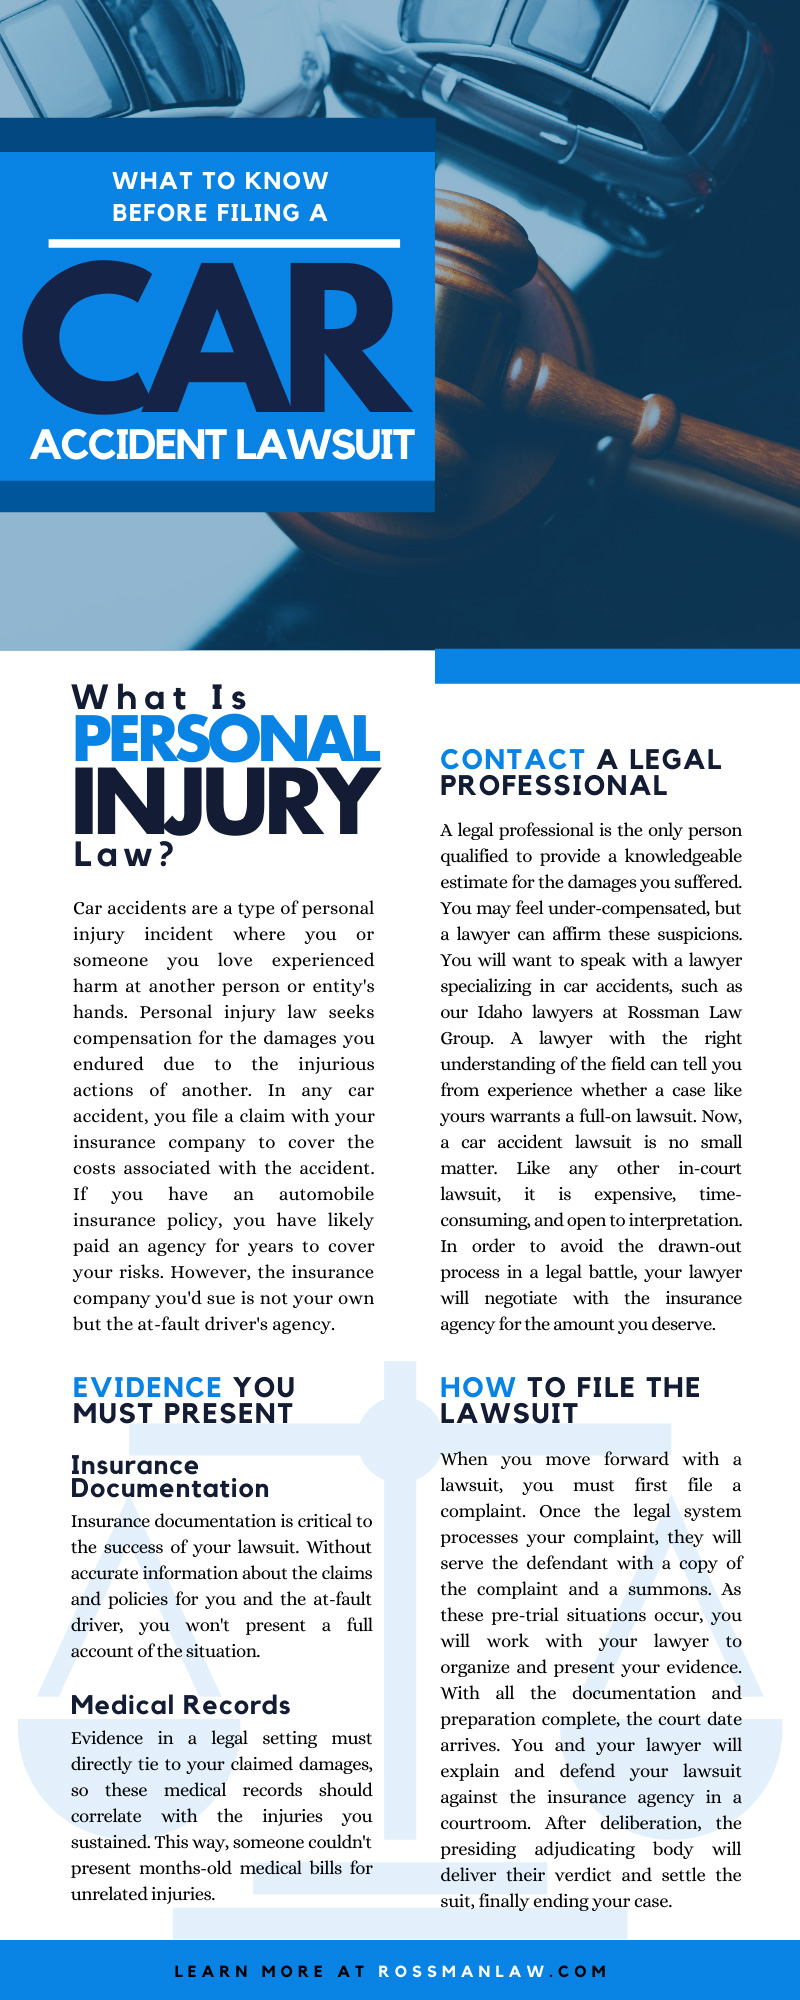 What To Know Before Filing a Car Accident Lawsuit